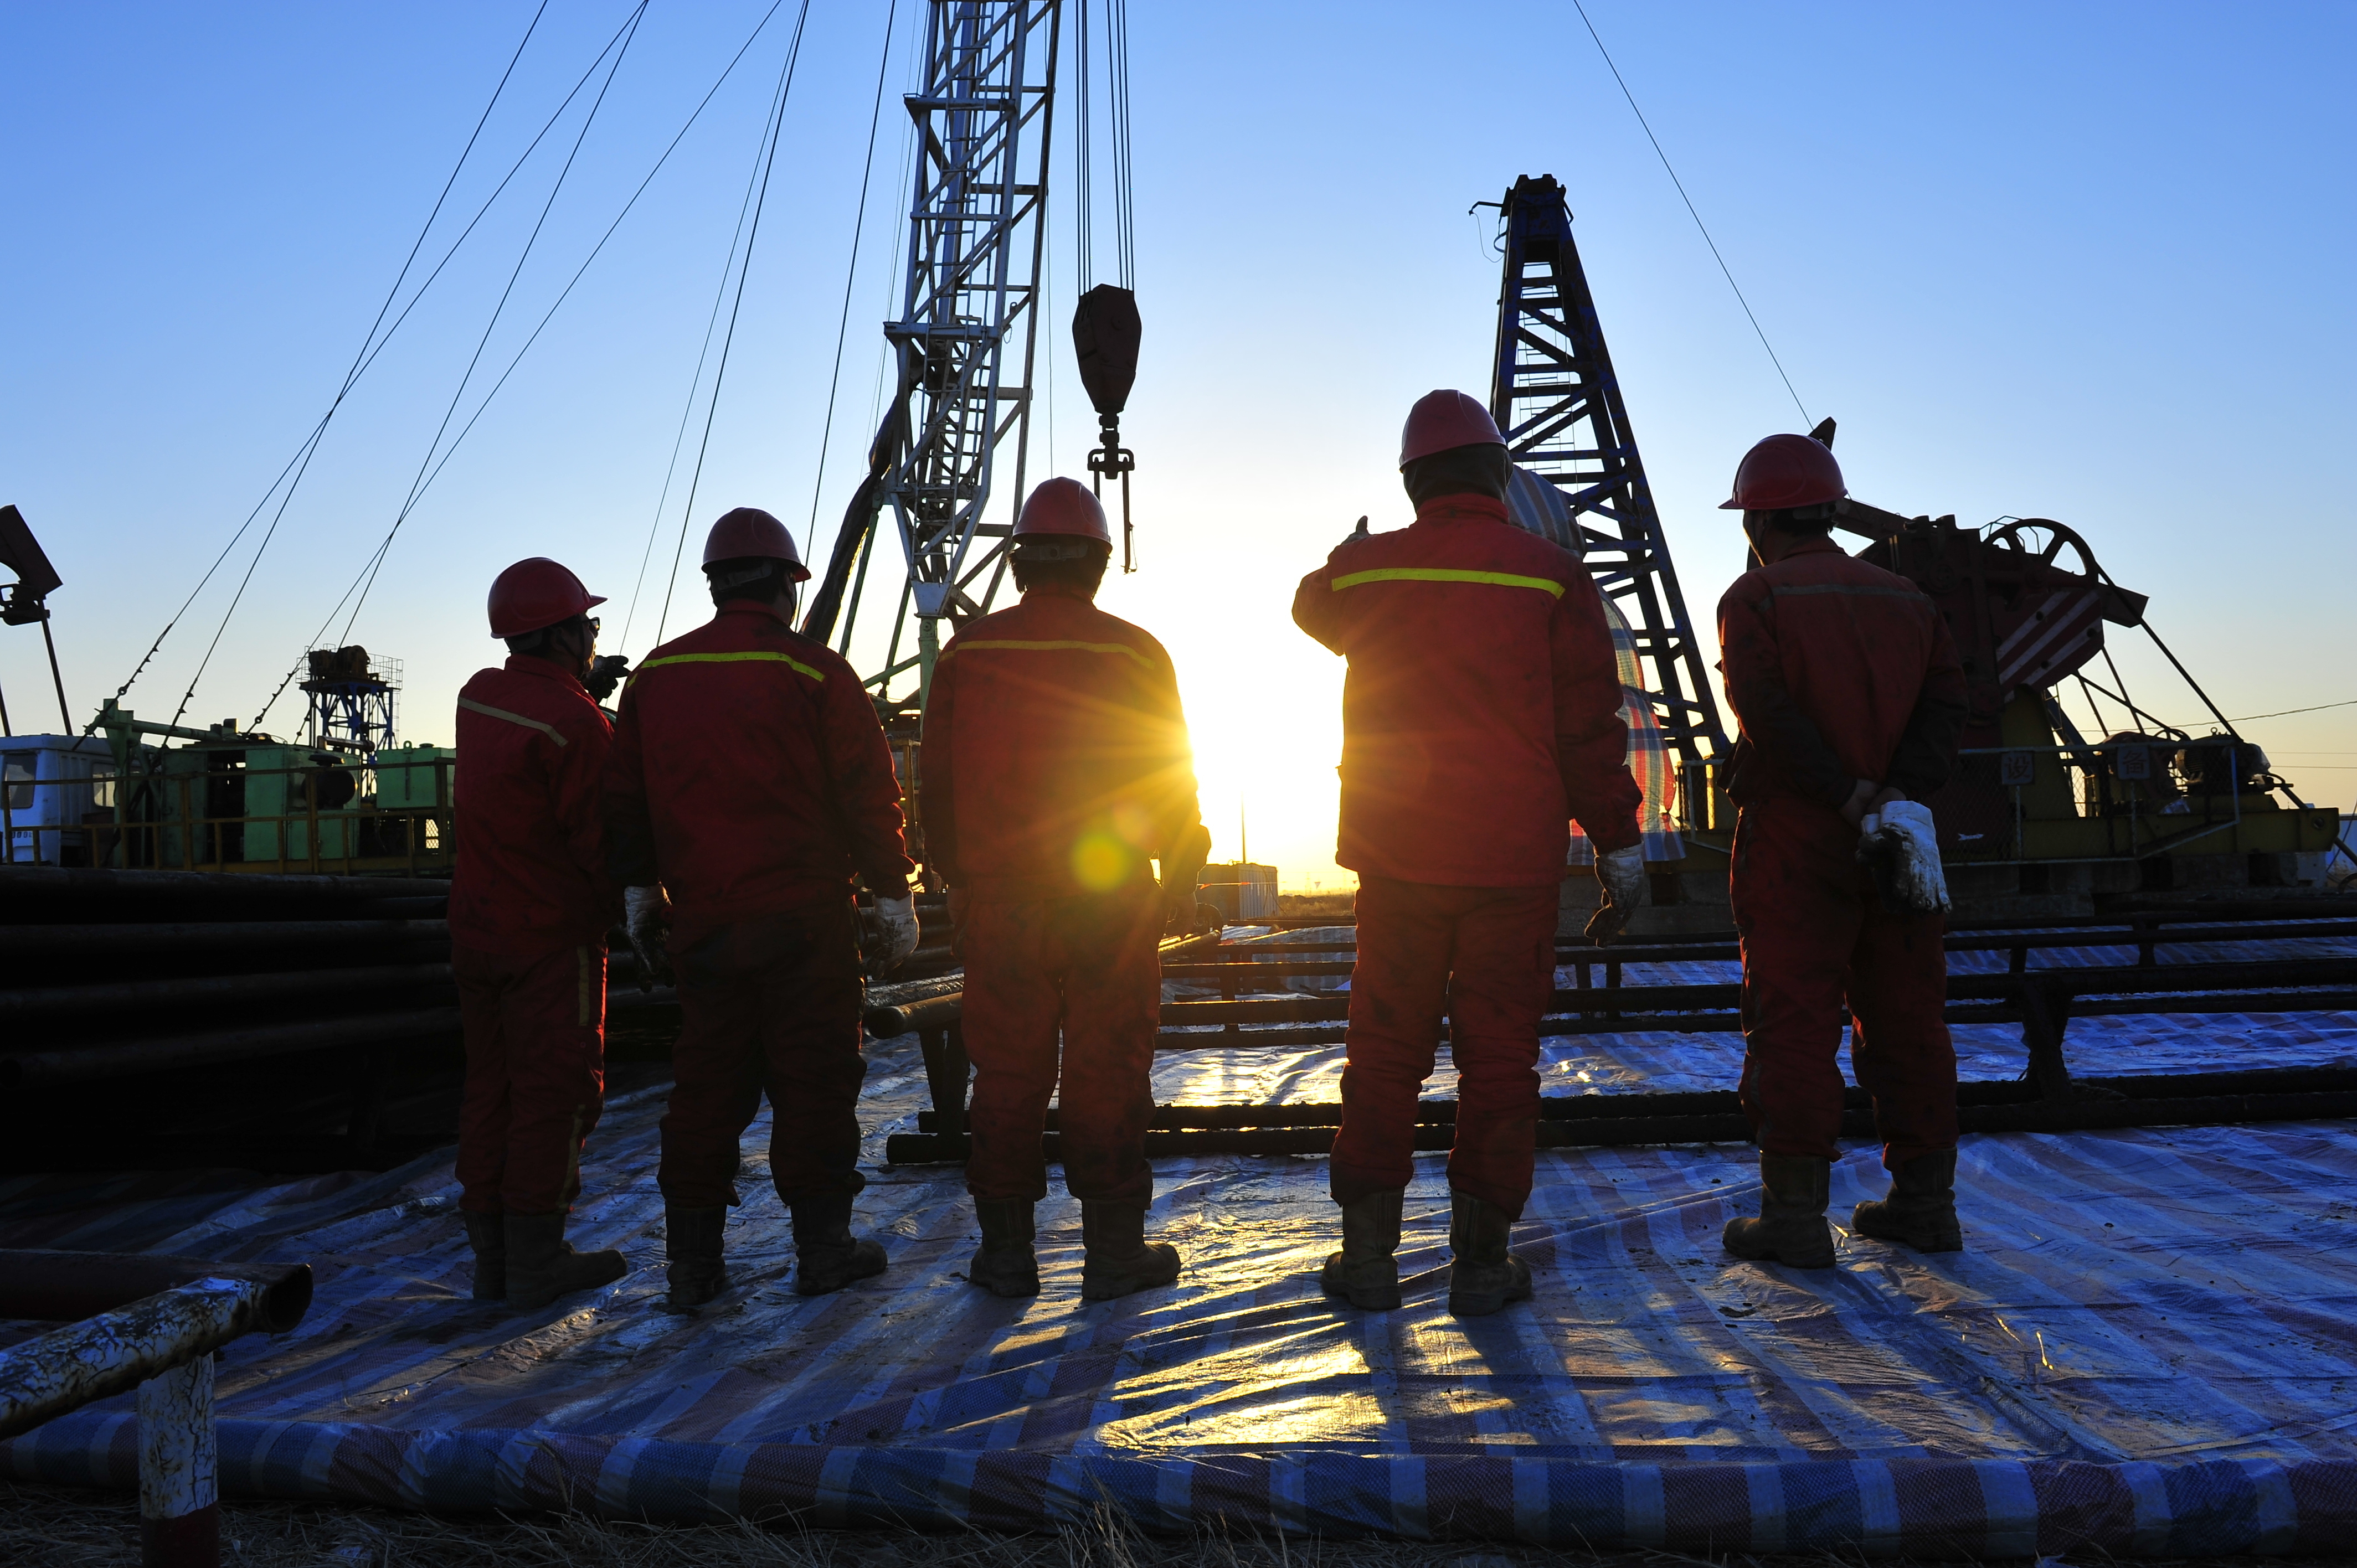 offshore-workers-back-sunset.jpg